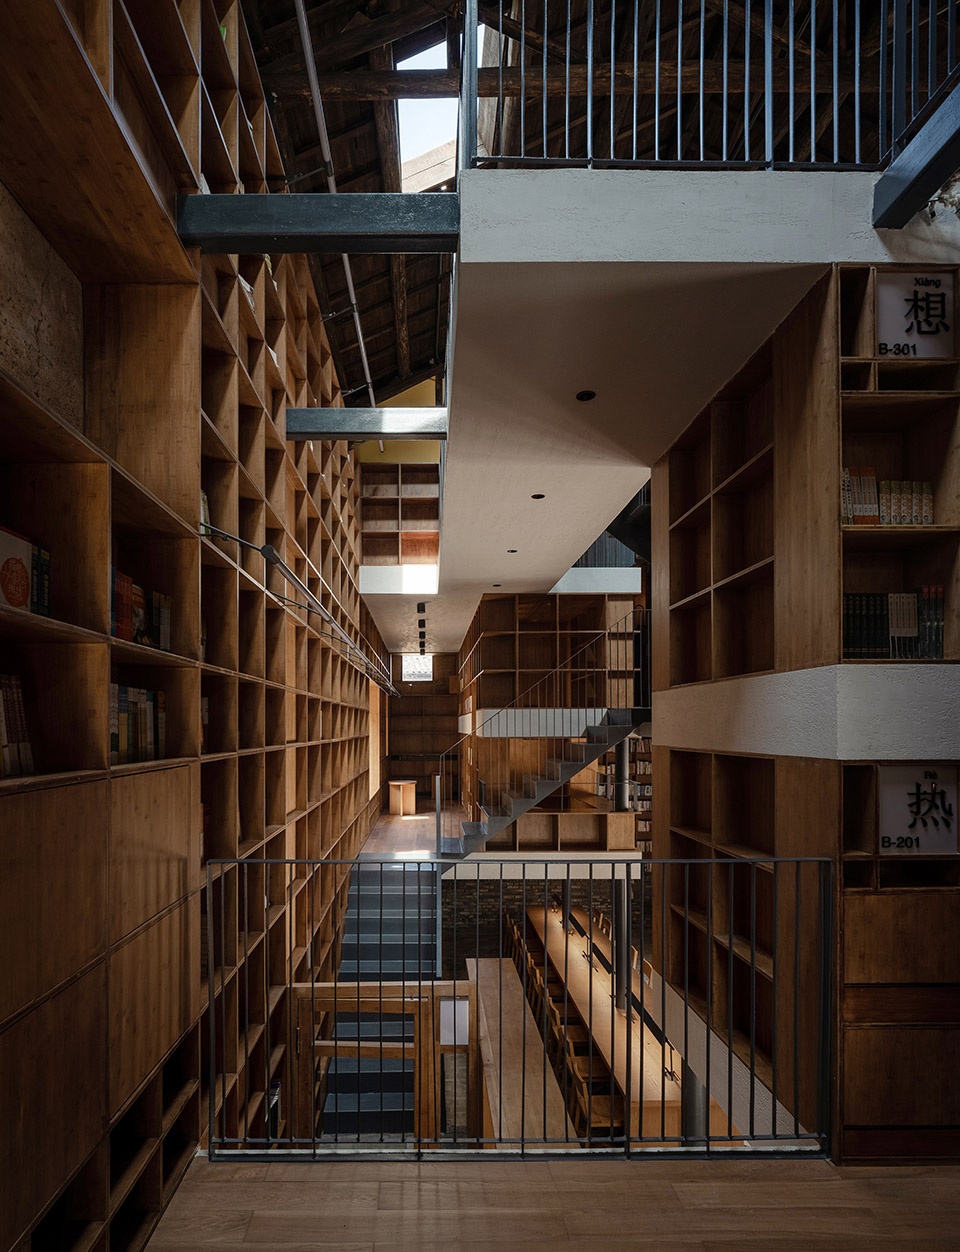 017-capsule-hotel-and-bookstore-in-village-qinglongwu-china-by-atelier-taoc-960x1252.jpg